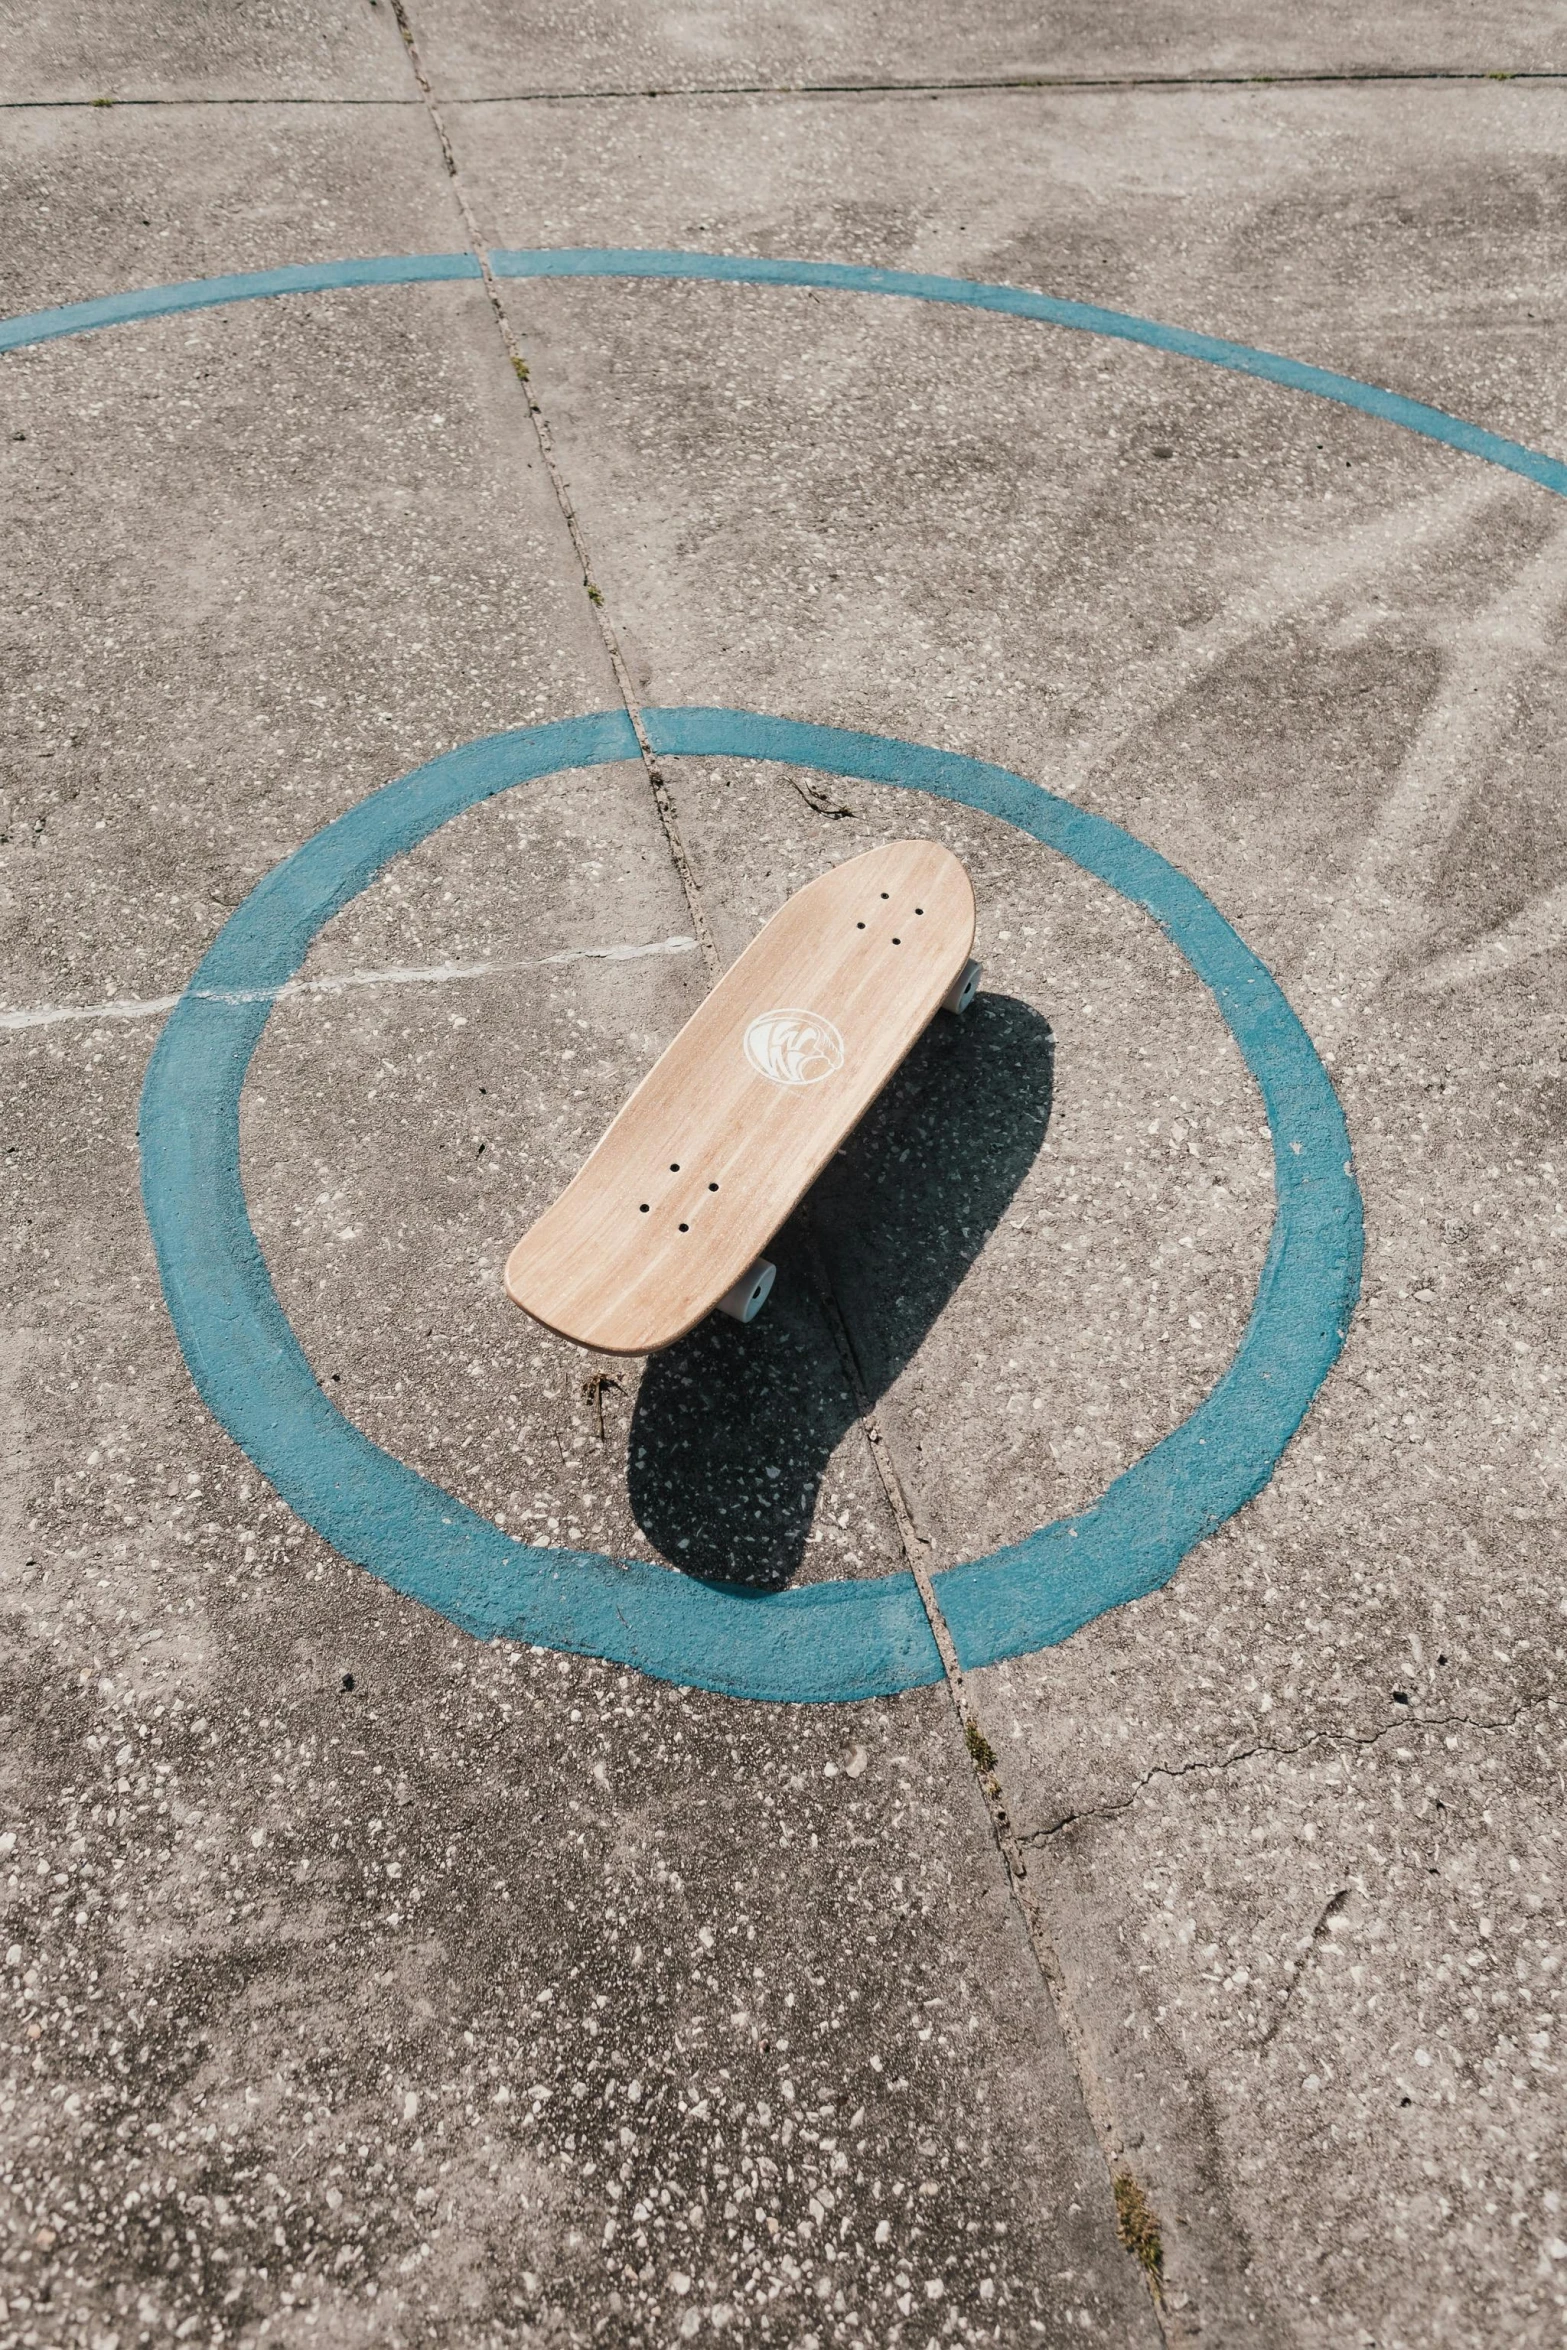 a skateboard sits in a concrete space, with an inner blue circle around it